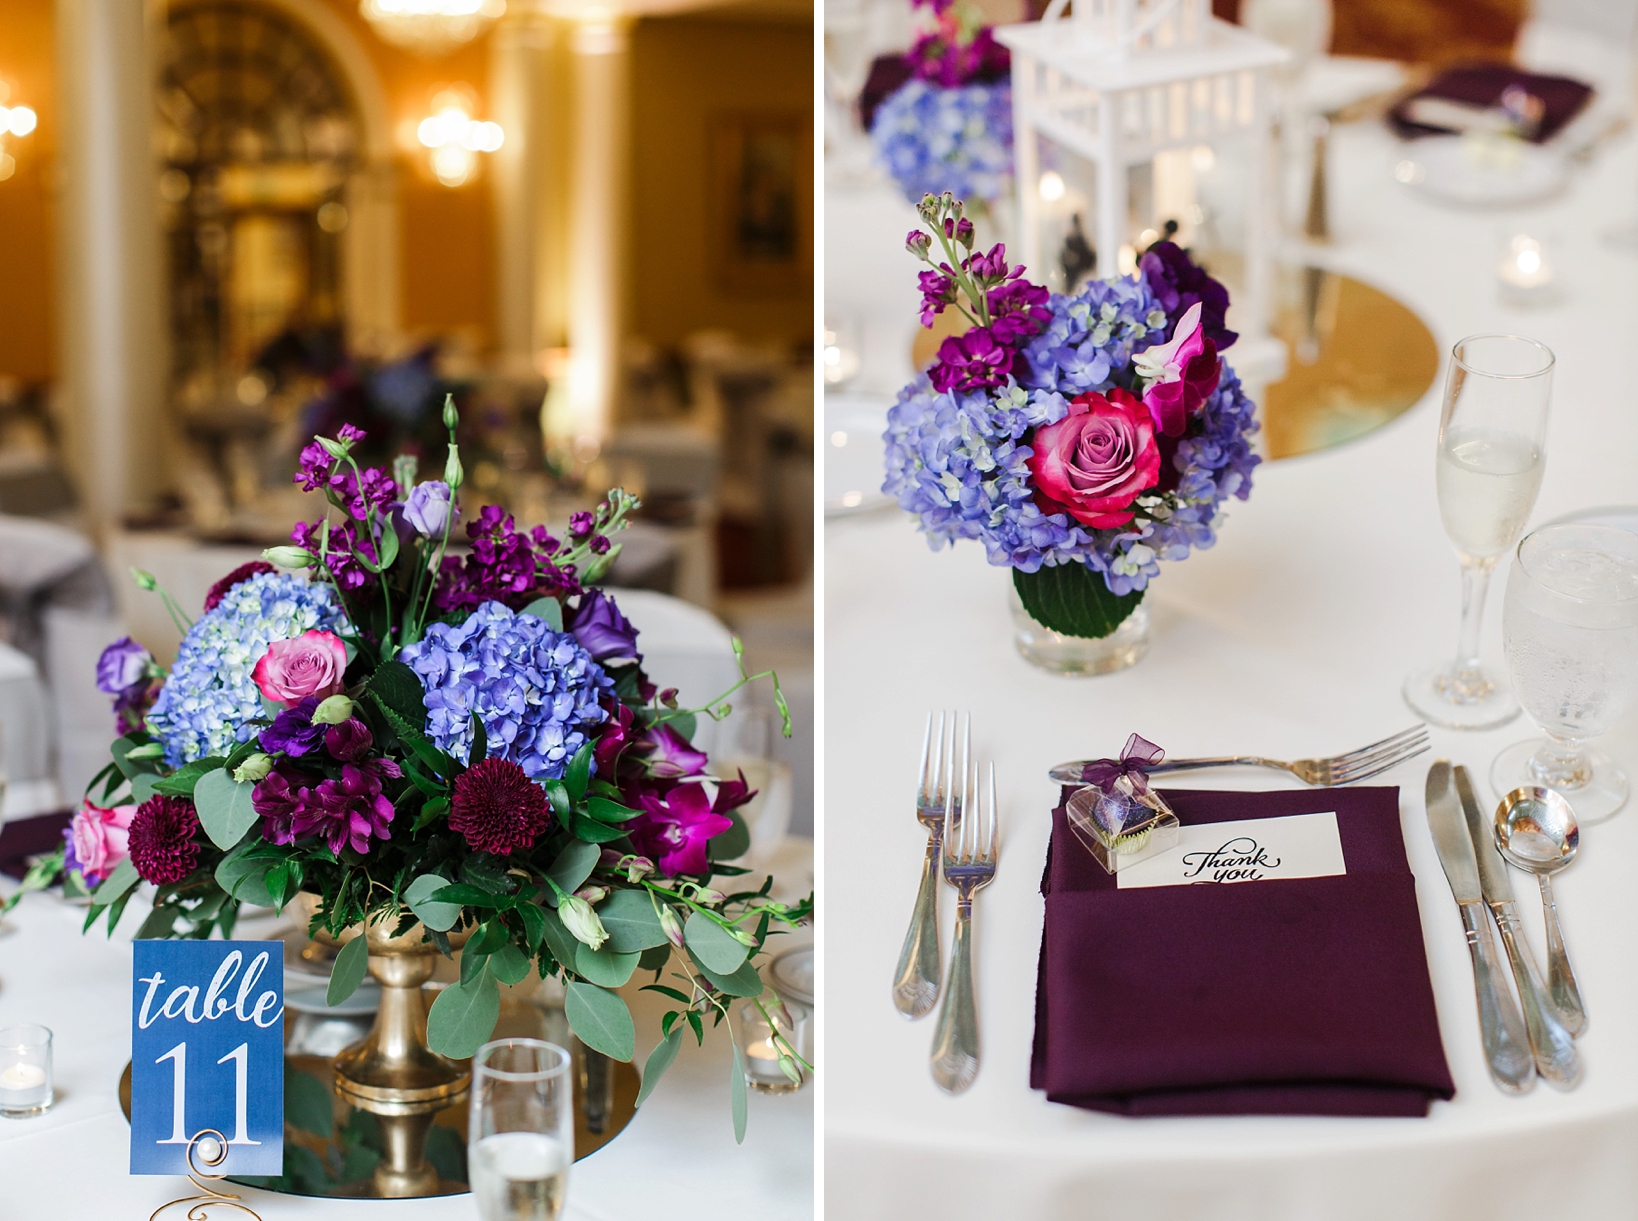 Floral centerpieces and table settings at the safety harbor resort and spa